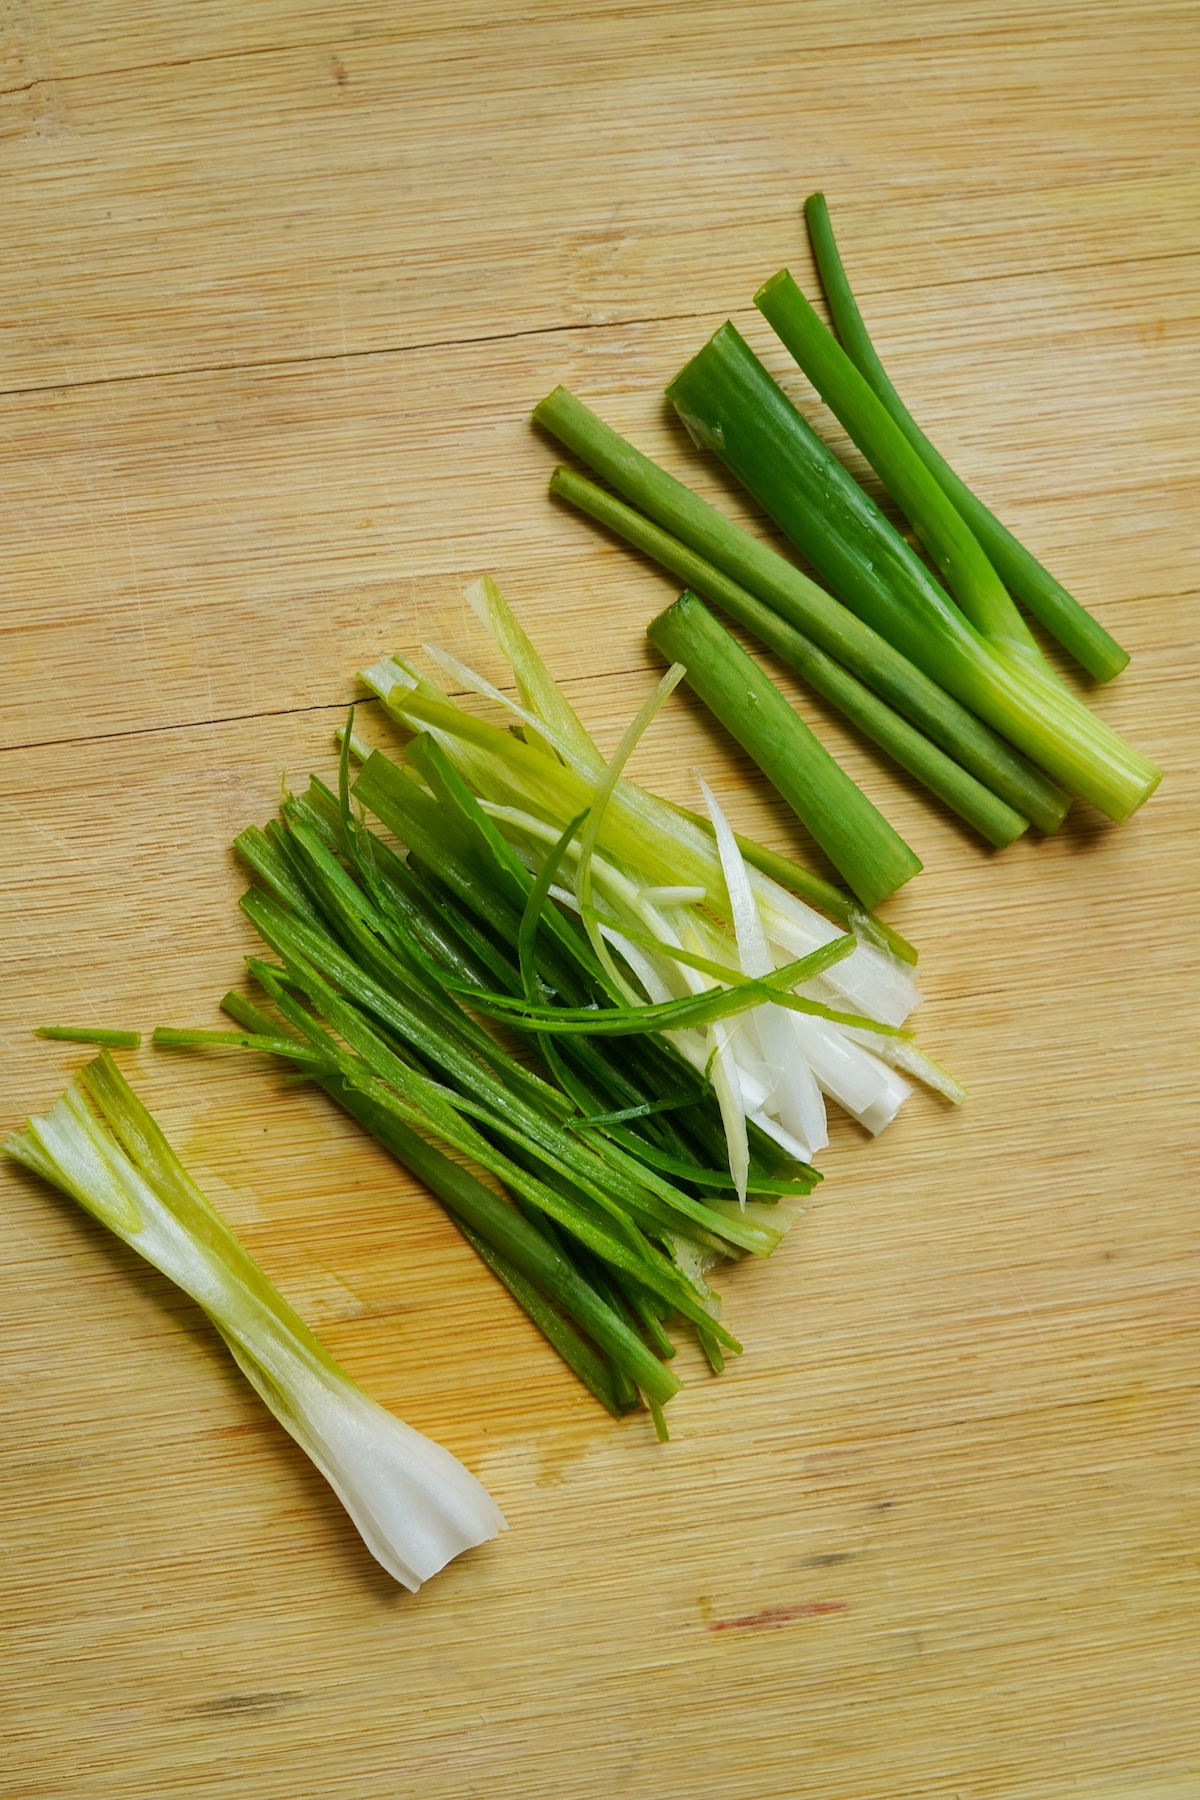 Sliced green onions on a wooden copping board.